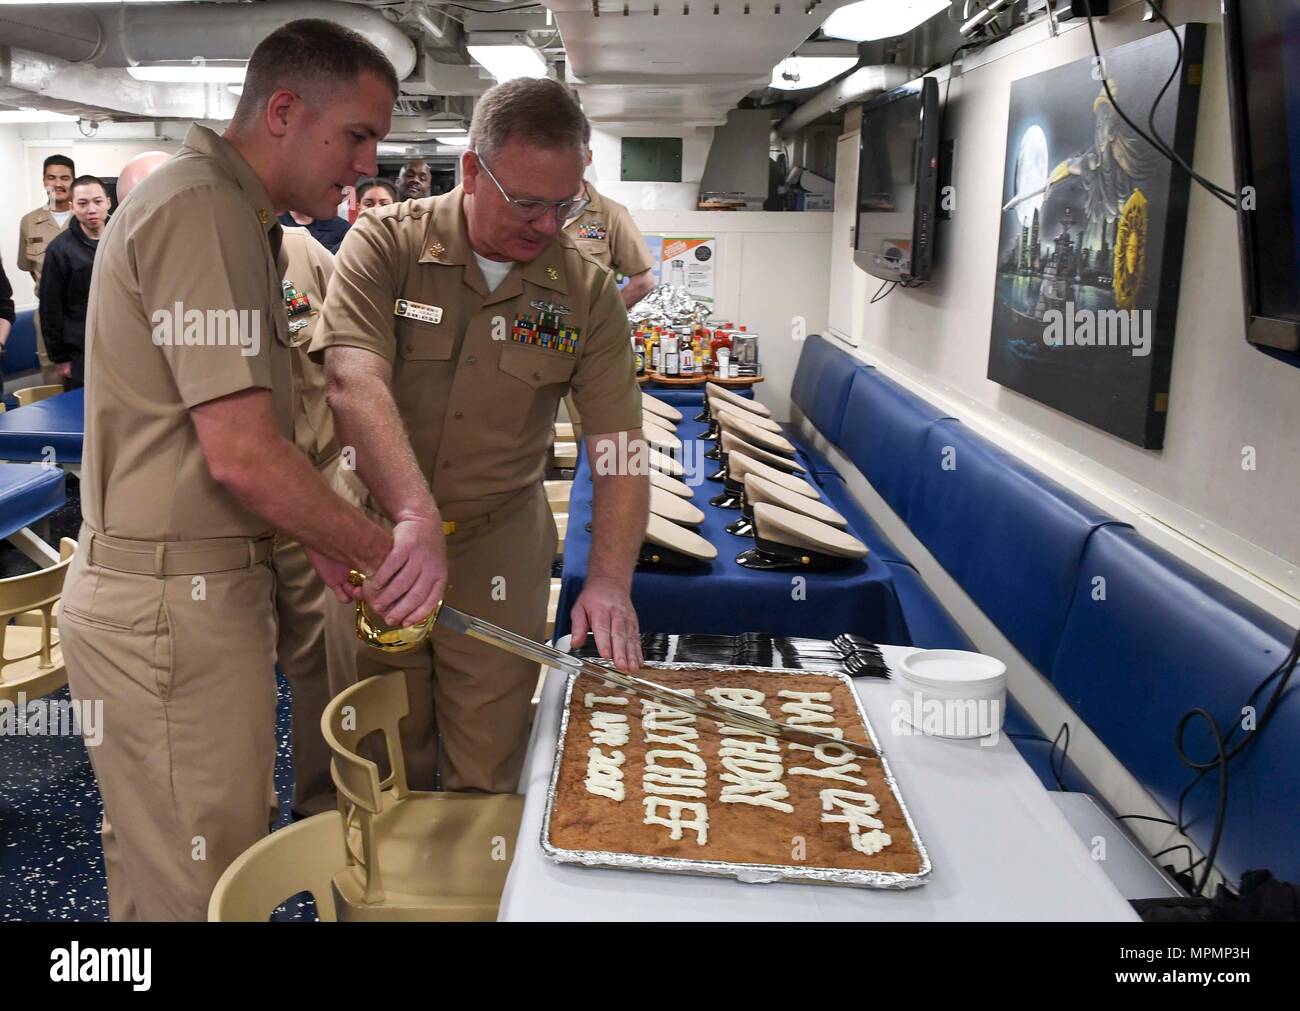 170401-N-RM689-069  SOUTH CHINA SEA (April 1, 2017) Chief Cryptologic Technician Michael Clements (left), from Colorado Springs, Colorado, and Master Chief Electrician’s Mate Raymond Abernathy, from Roundrock, Texas, cut the cake during the chief petty officer birthday celebration aboard Arleigh Burke-class guided-missile destroyer USS Wayne E. Meyer (DDG 108). Wayne E. Meyer is on a regularly scheduled Western Pacific deployment with the Carl Vinson Carrier Strike Group as part of the U.S. Pacific Fleet-led initiative to extend U.S. 3rd Fleet command and control functions into the Indo-Asia-P Stock Photo